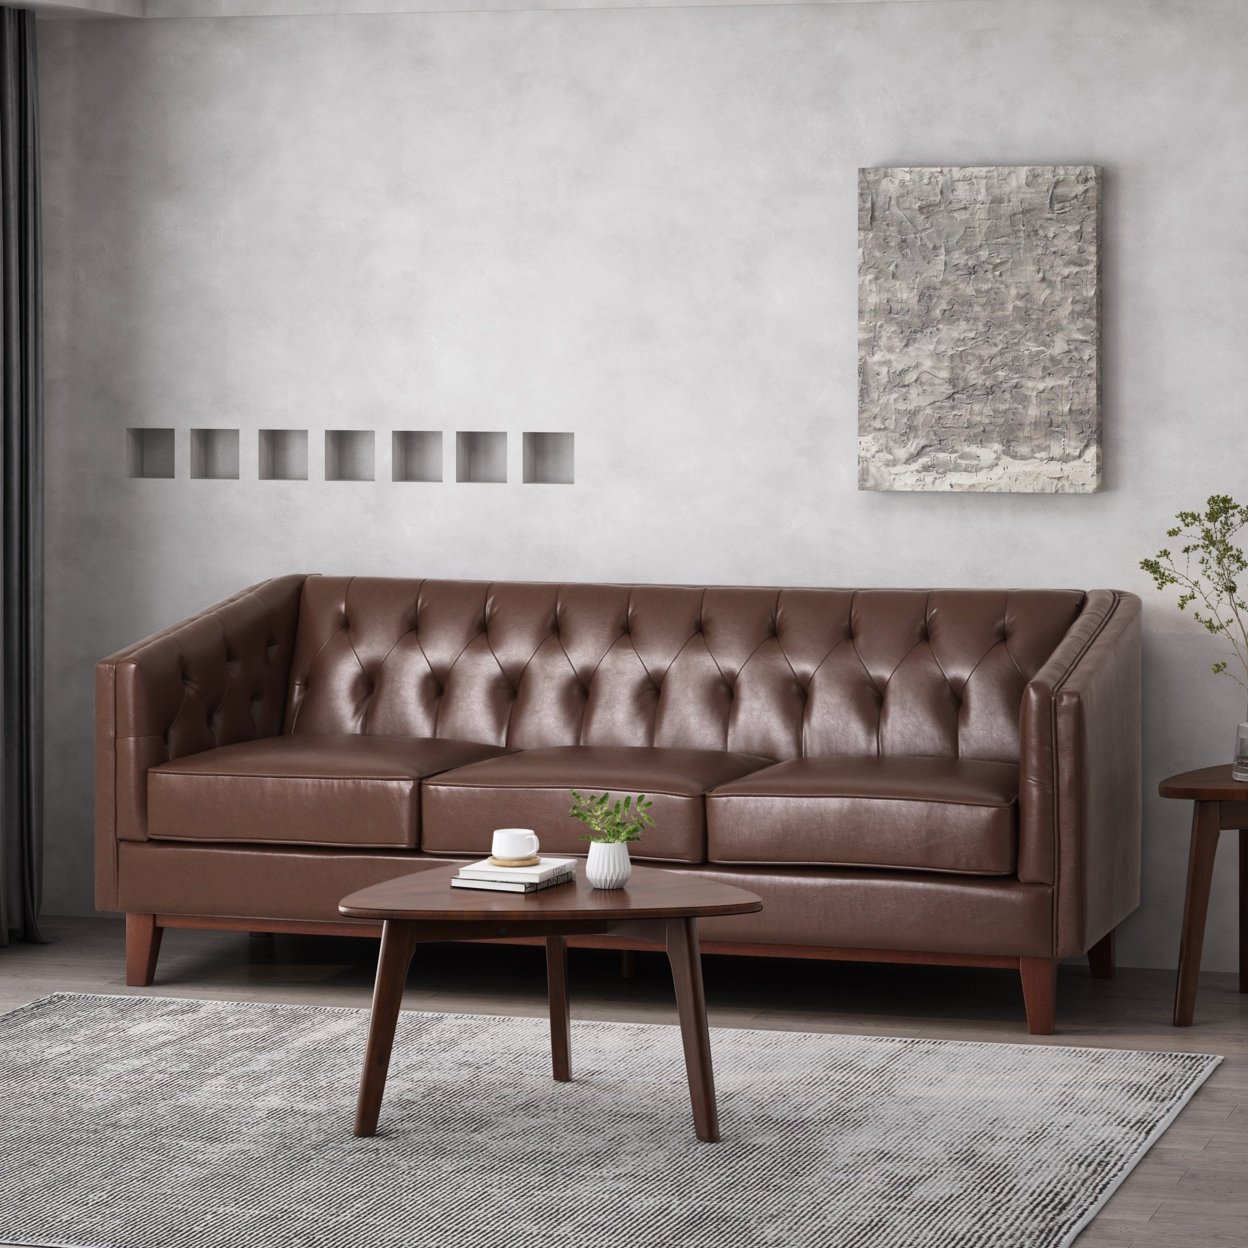 Colstrip Contemporary Upholstered 3 Seater Sofa - Dark Brown